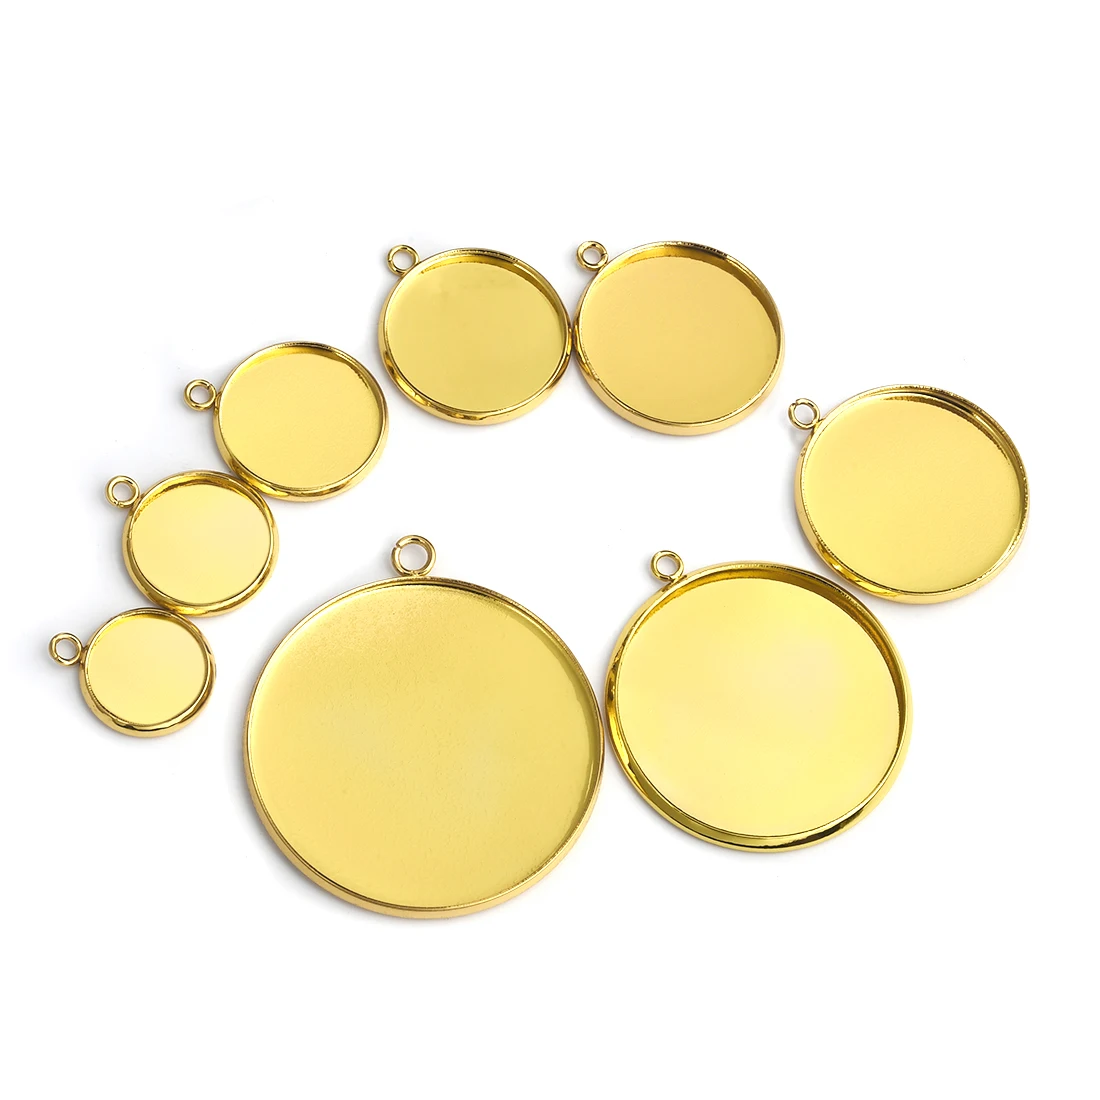 

20pcs Gold Color Stainless Steel Cabochon Base Setting Blank Cameo Tray 10/12/14/16/20mm For Pendant DIY Jewelry Making